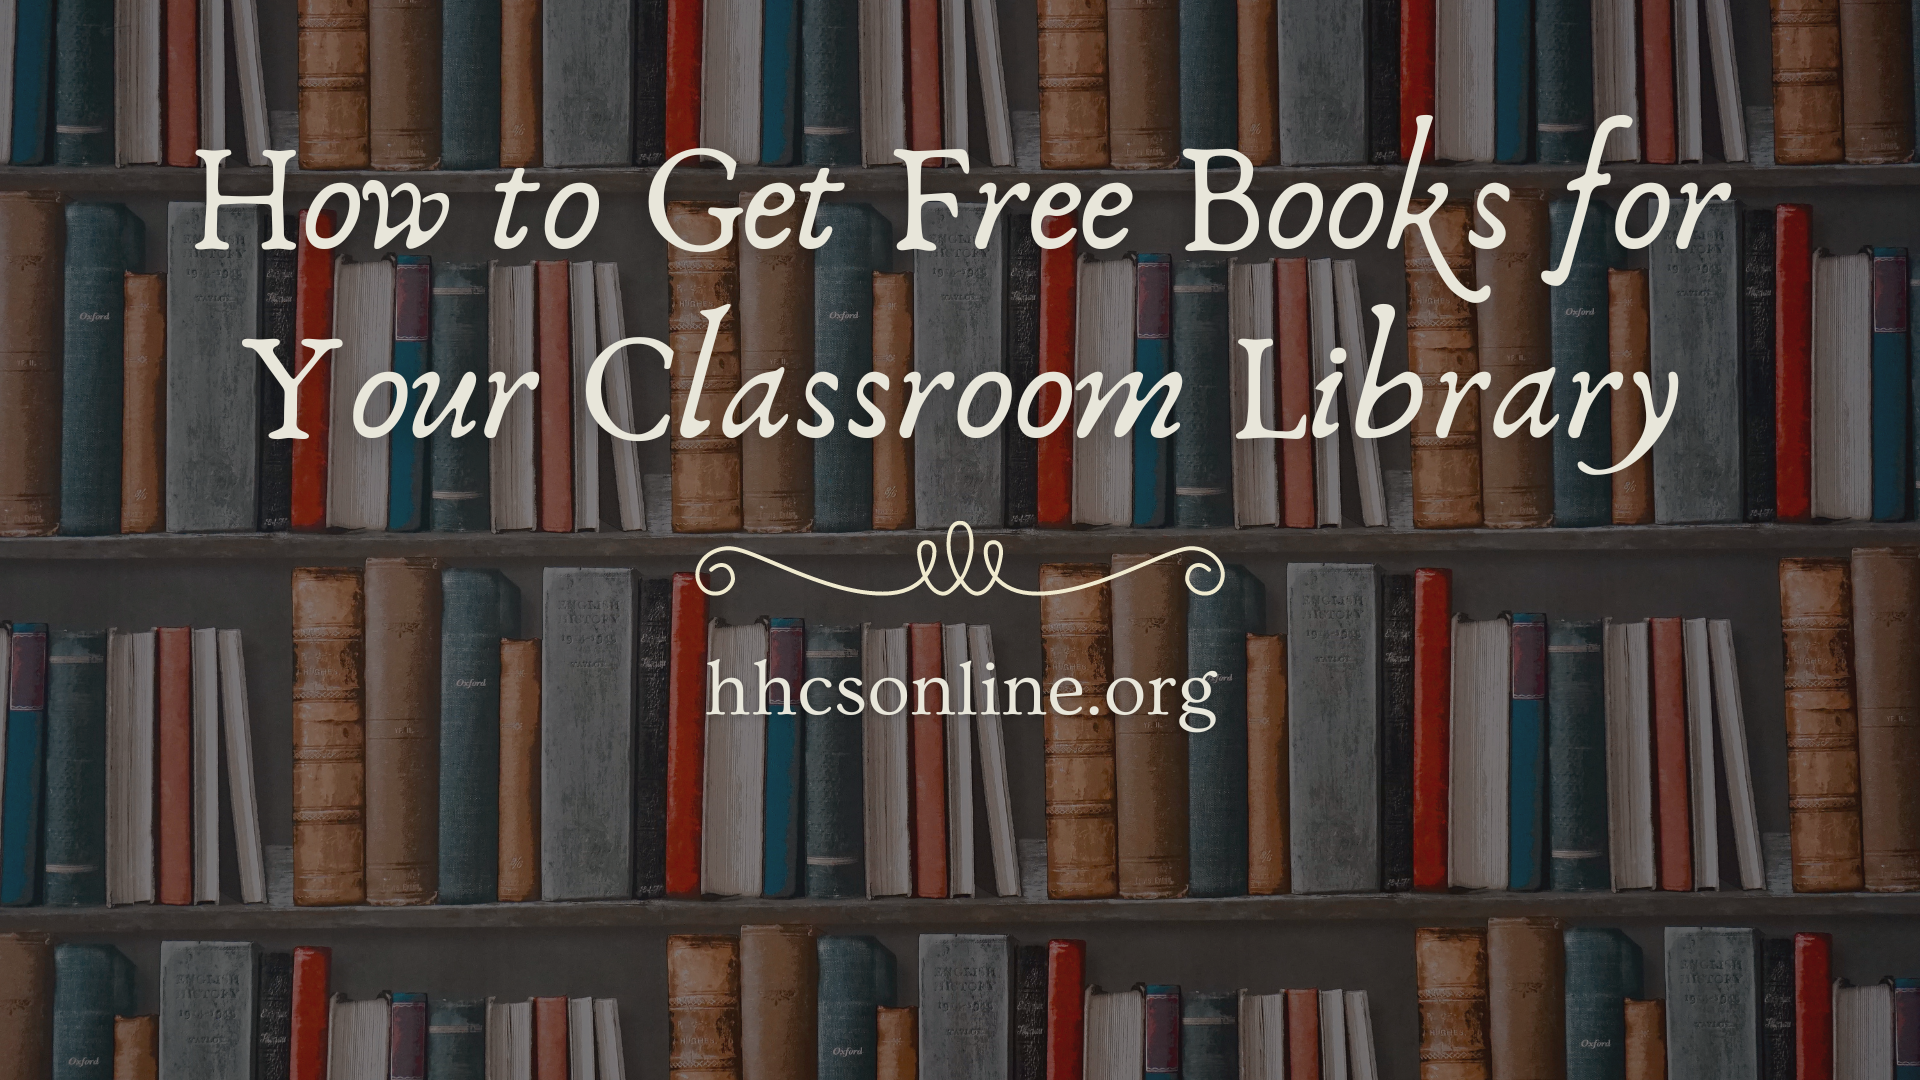 How to Get Free Books for Classroom Library